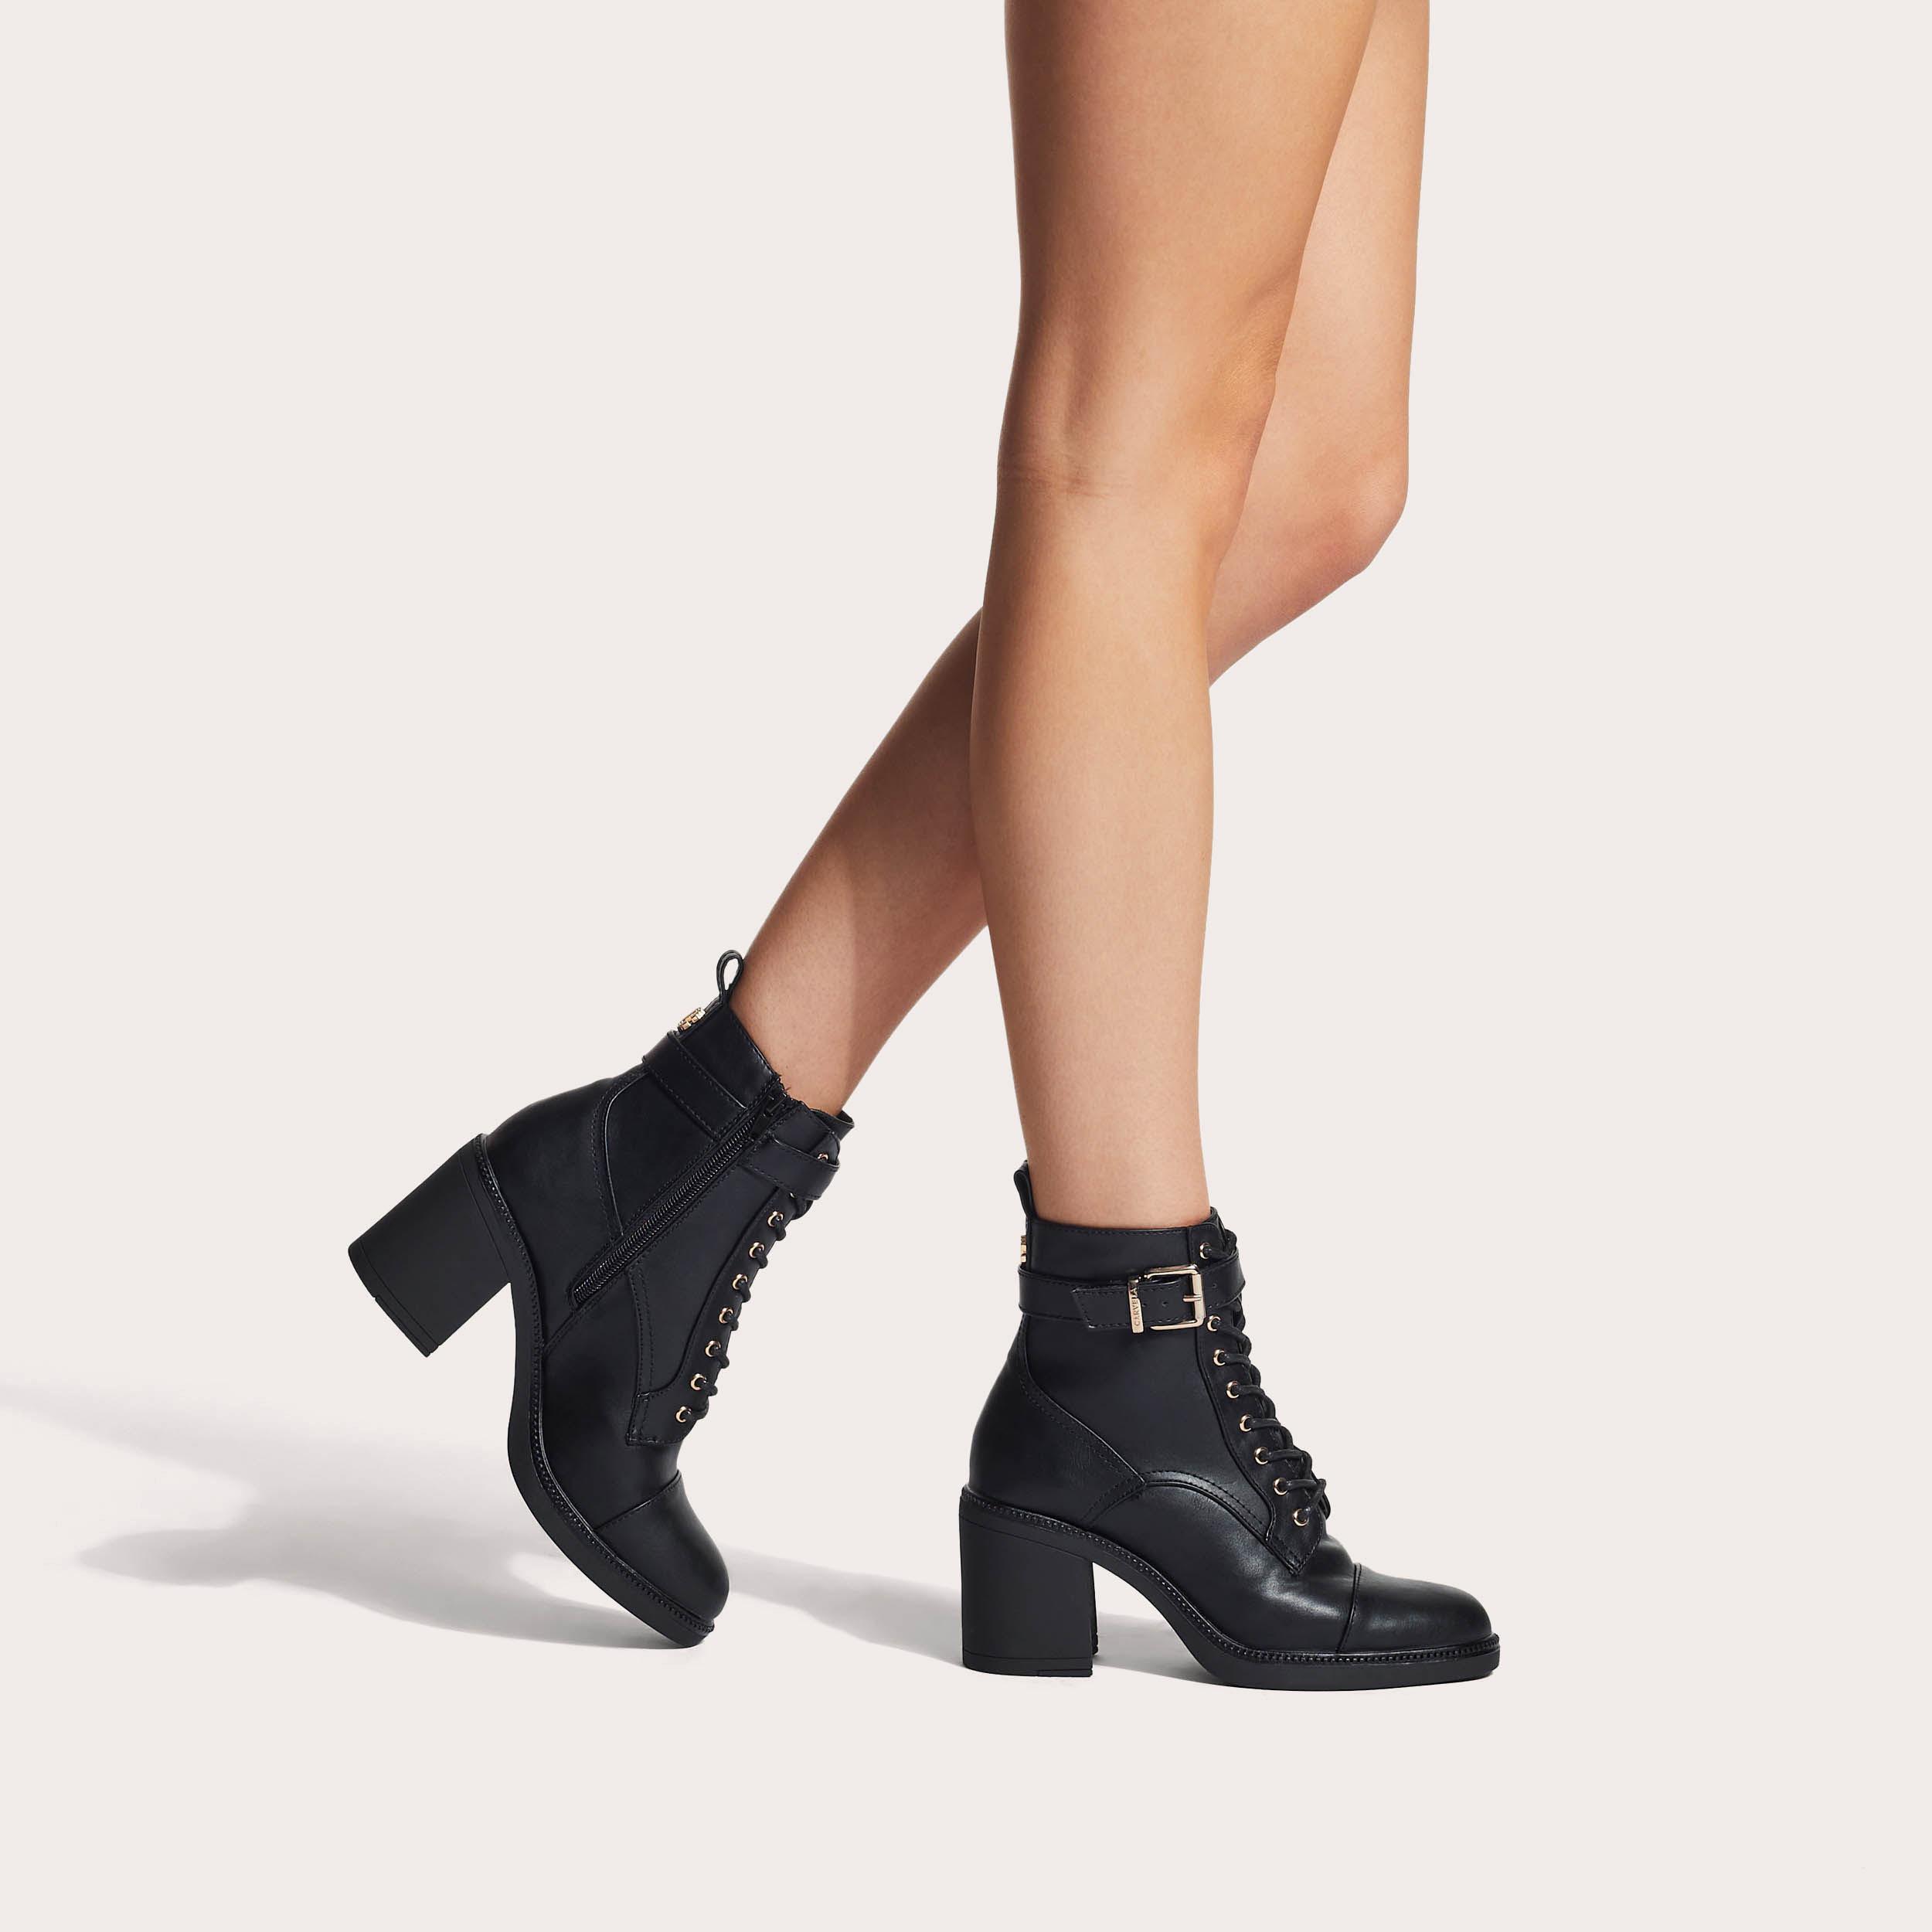 TEMPLE Black Heeled Ankle Boot by CARVELA